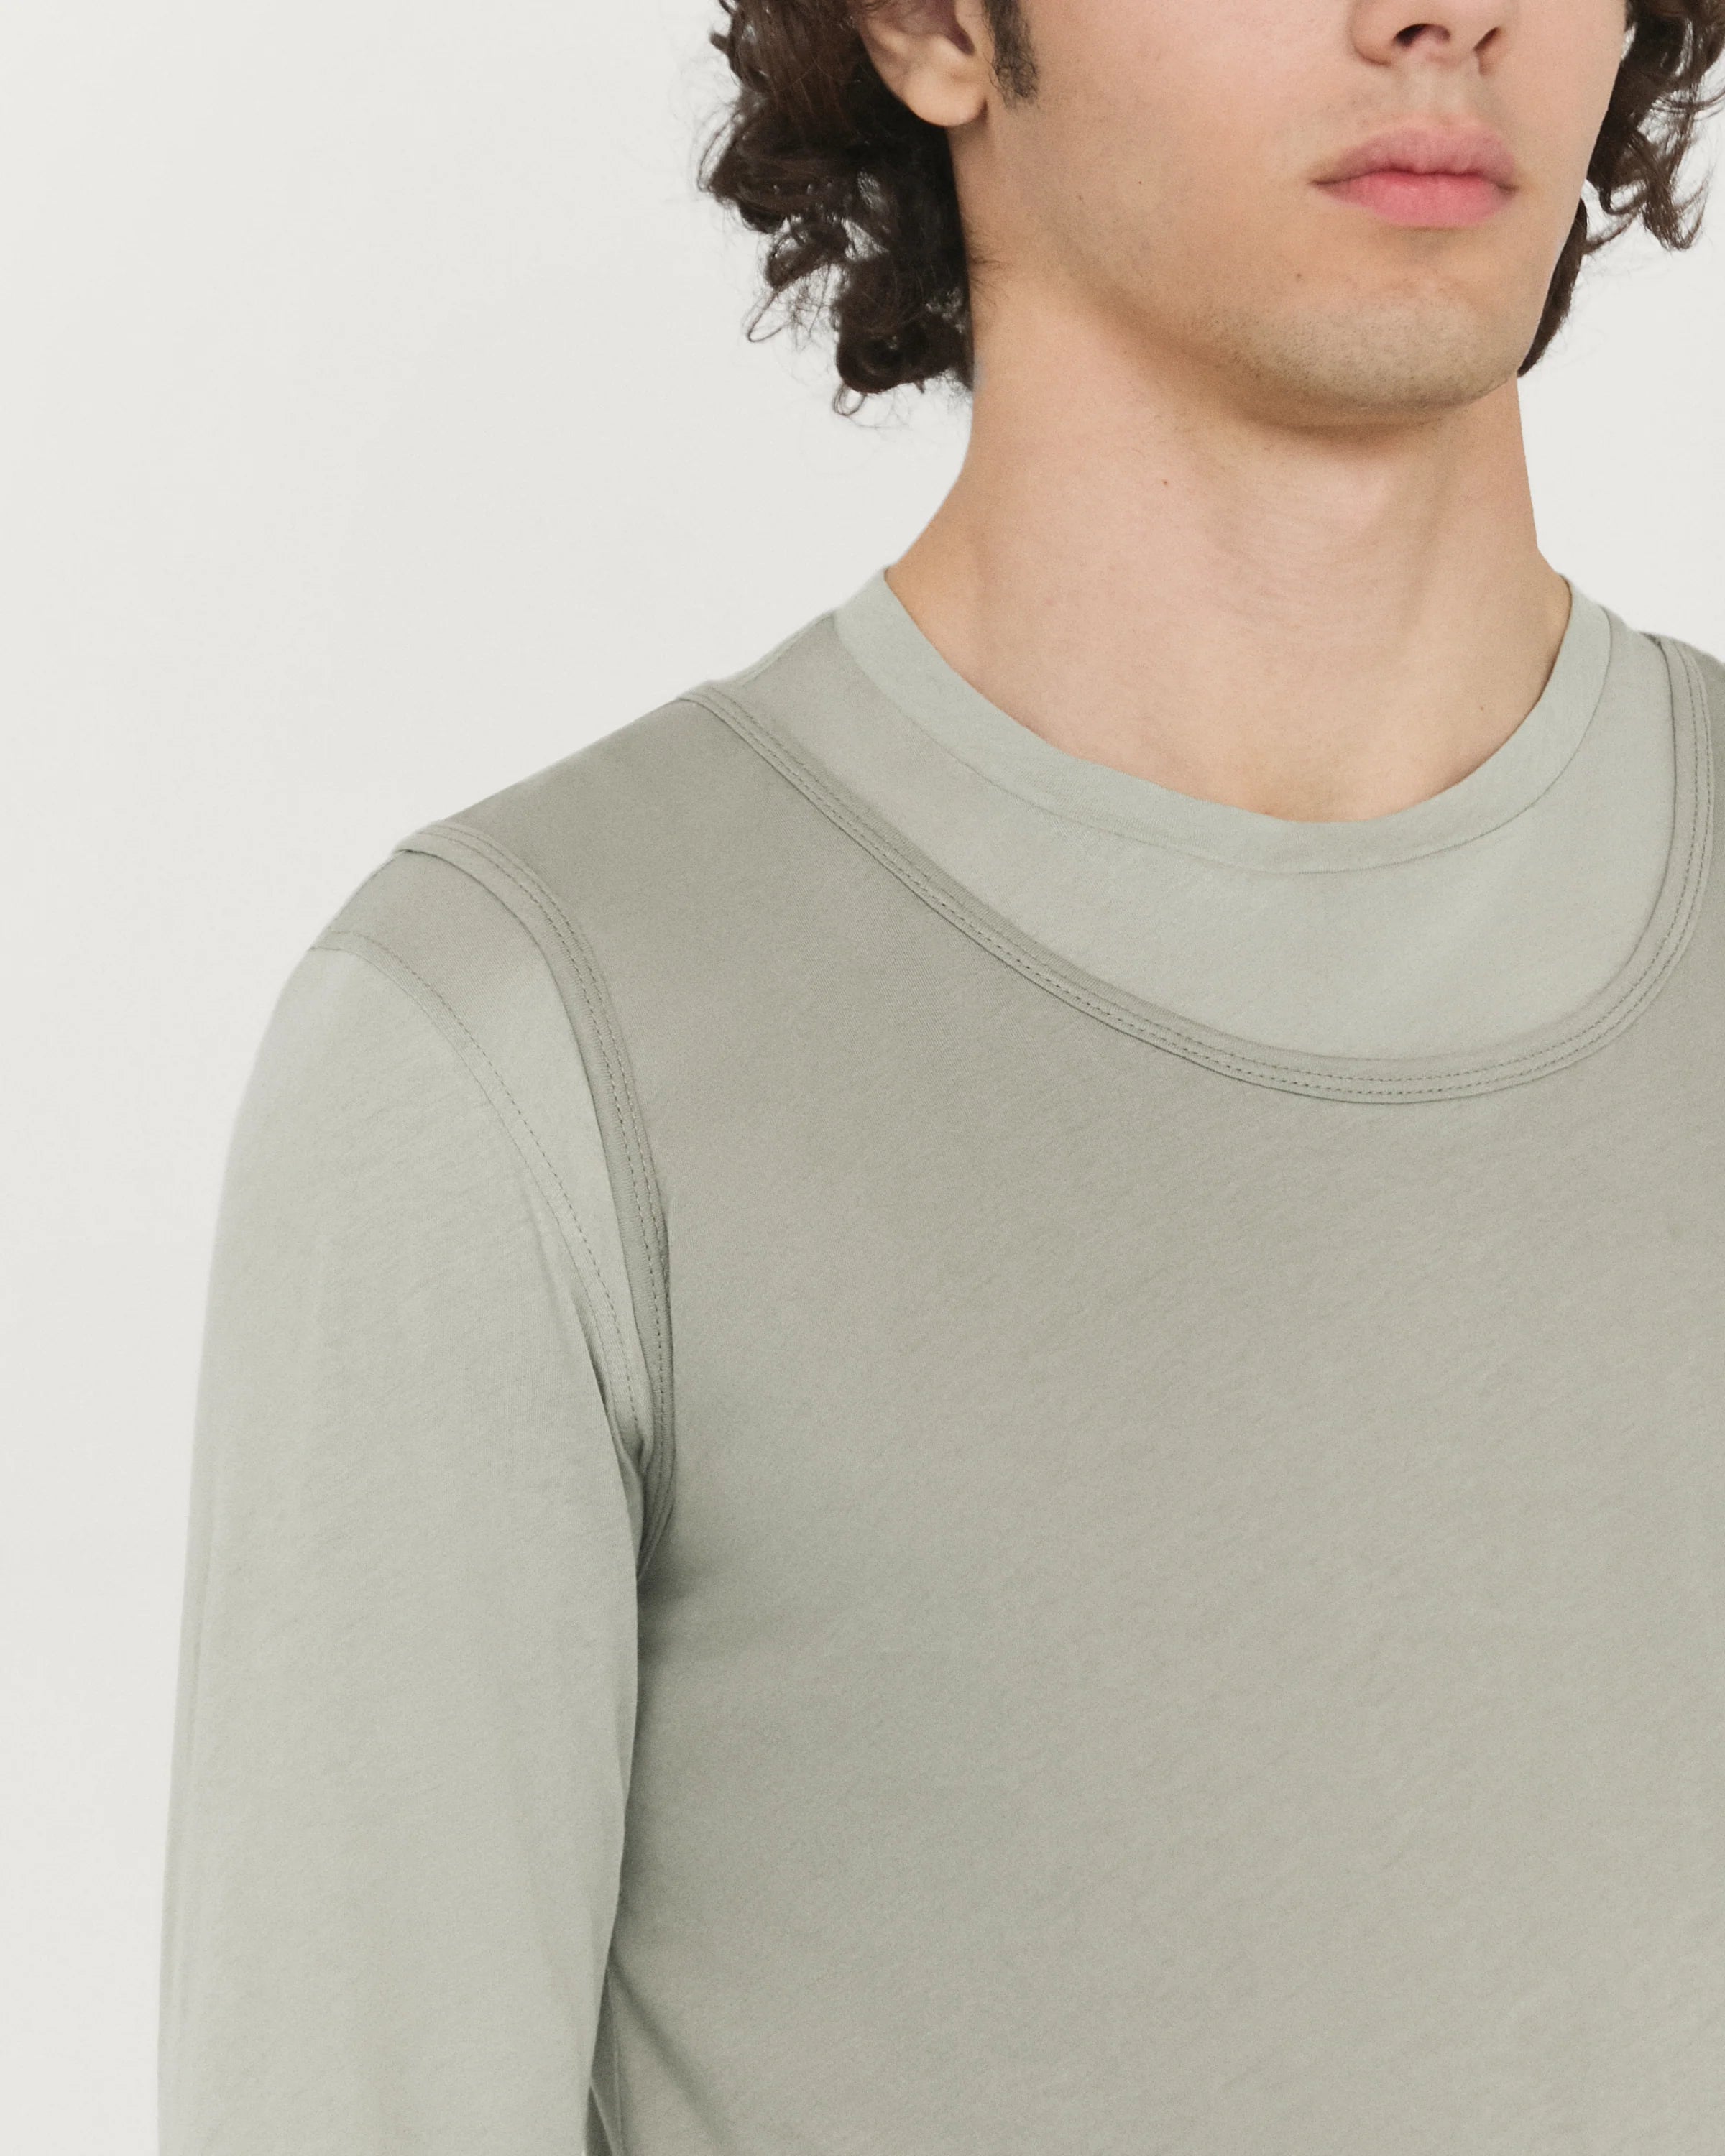 Carrer Doria Double Layer T-Shirt in Mint Gray